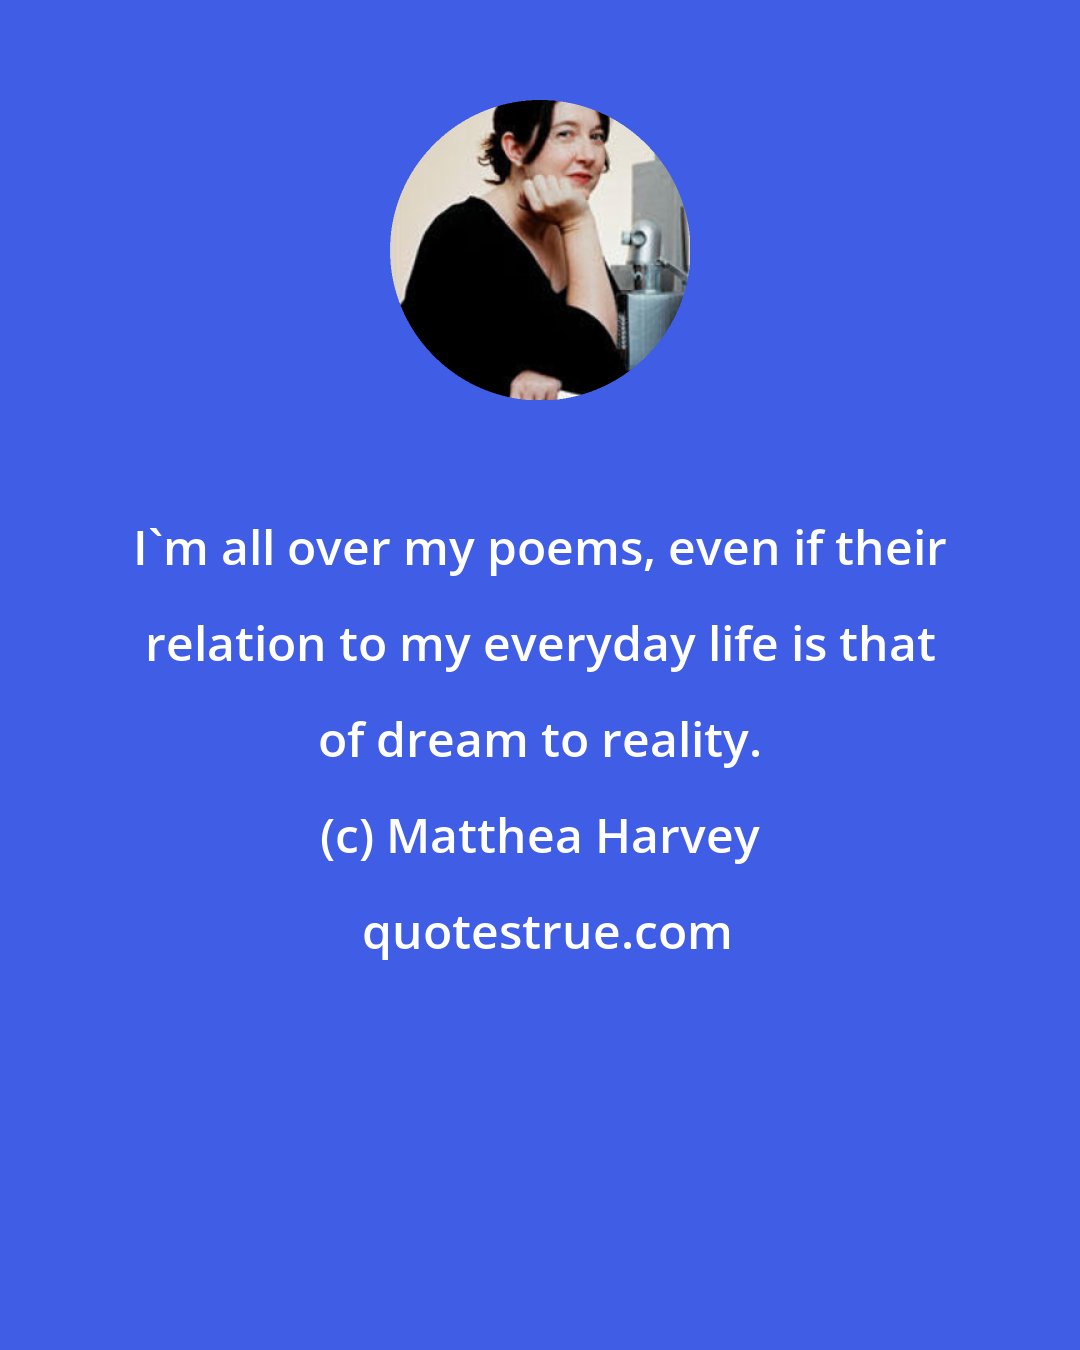 Matthea Harvey: I'm all over my poems, even if their relation to my everyday life is that of dream to reality.